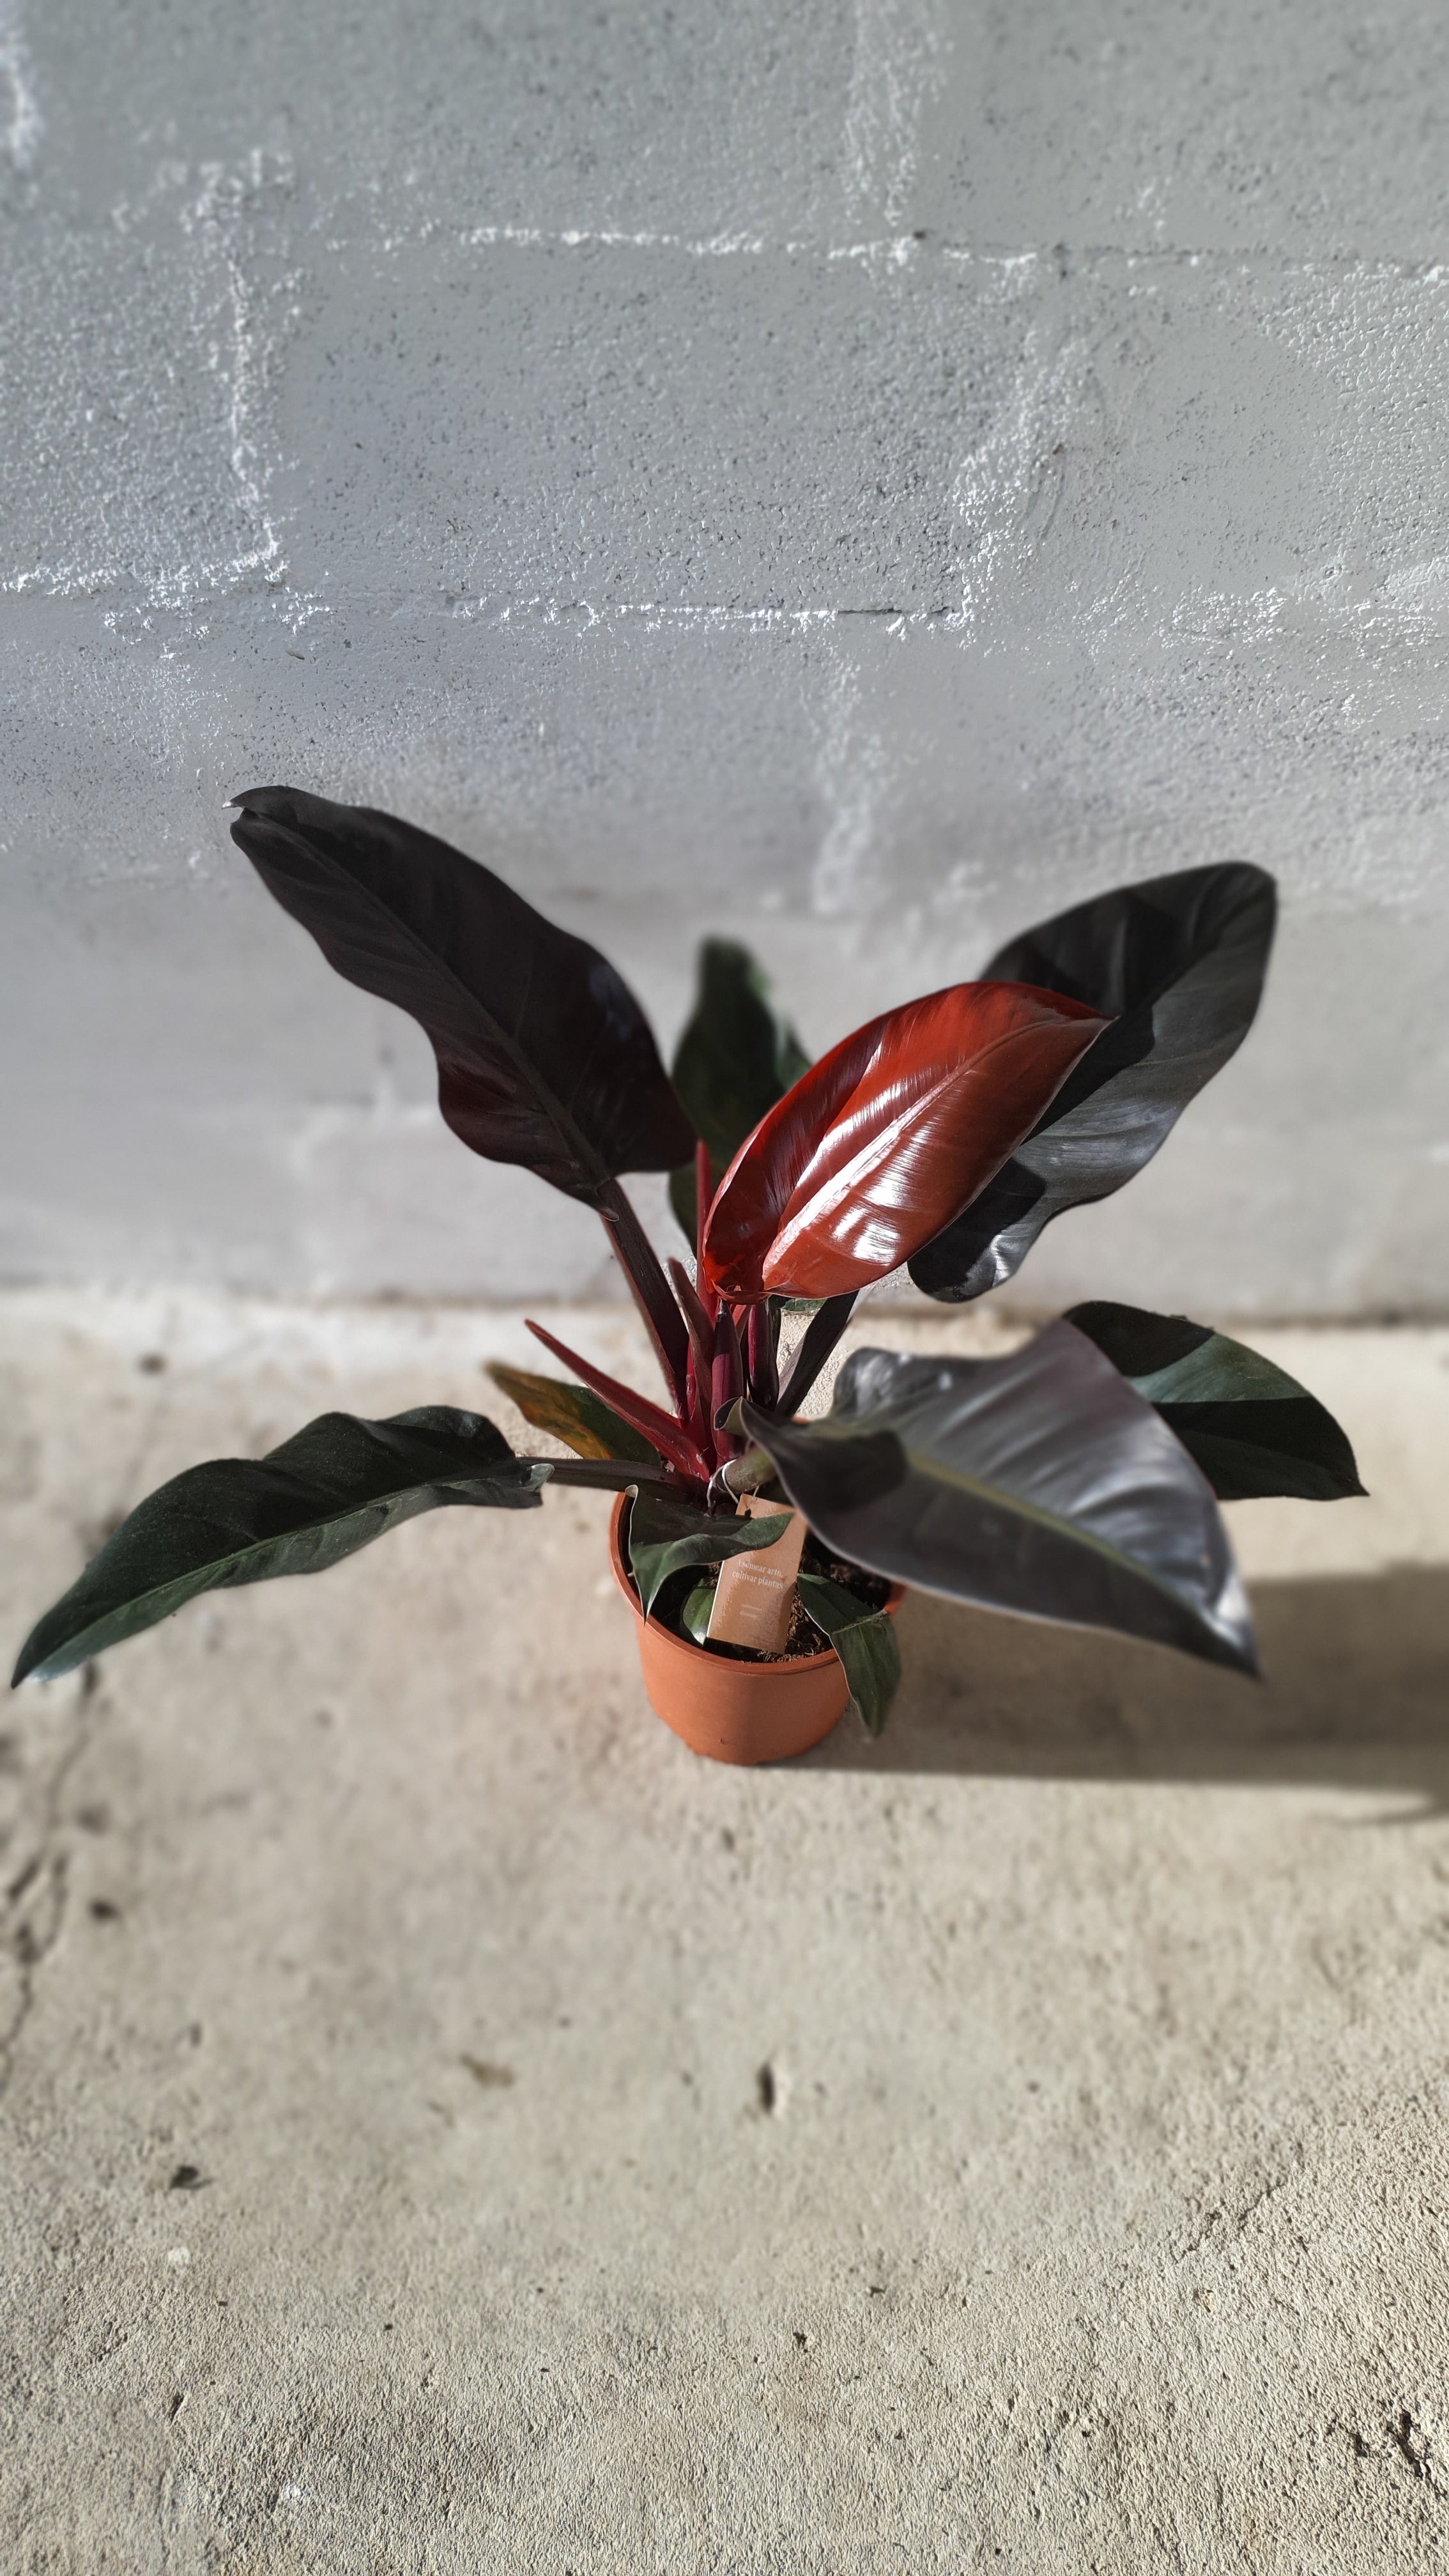 Philodendron Imperial